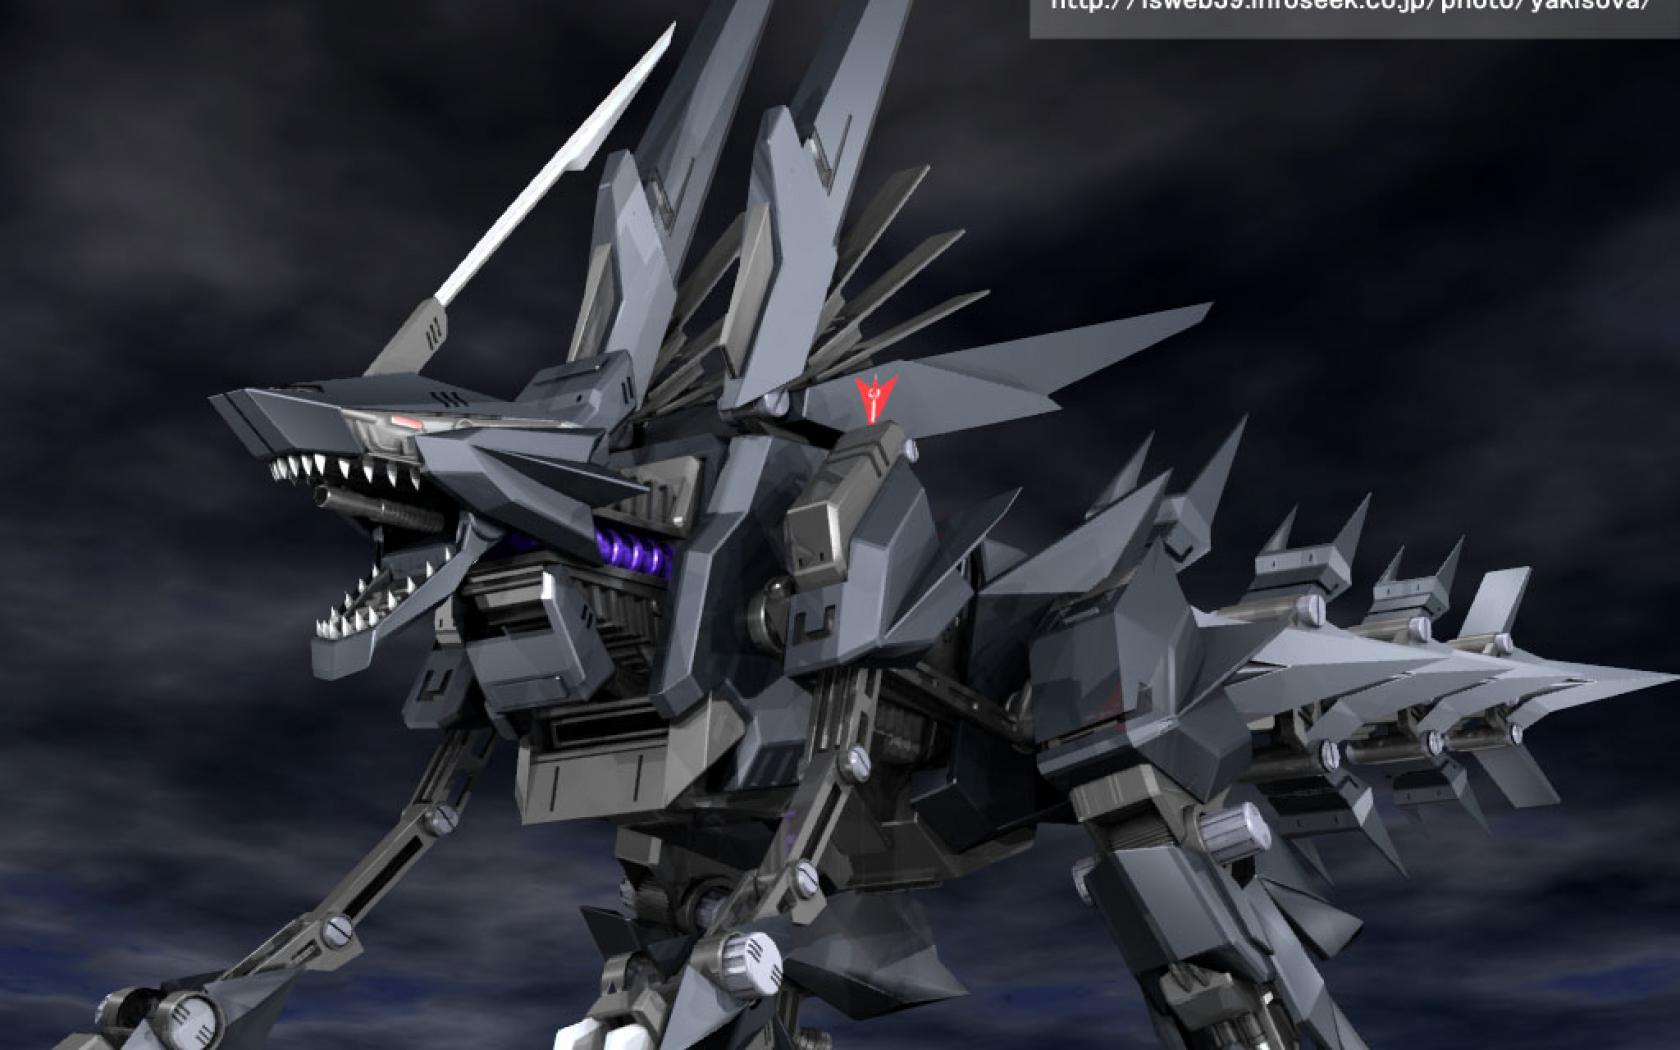 Zoids Wallpaper High Quality And Resolution